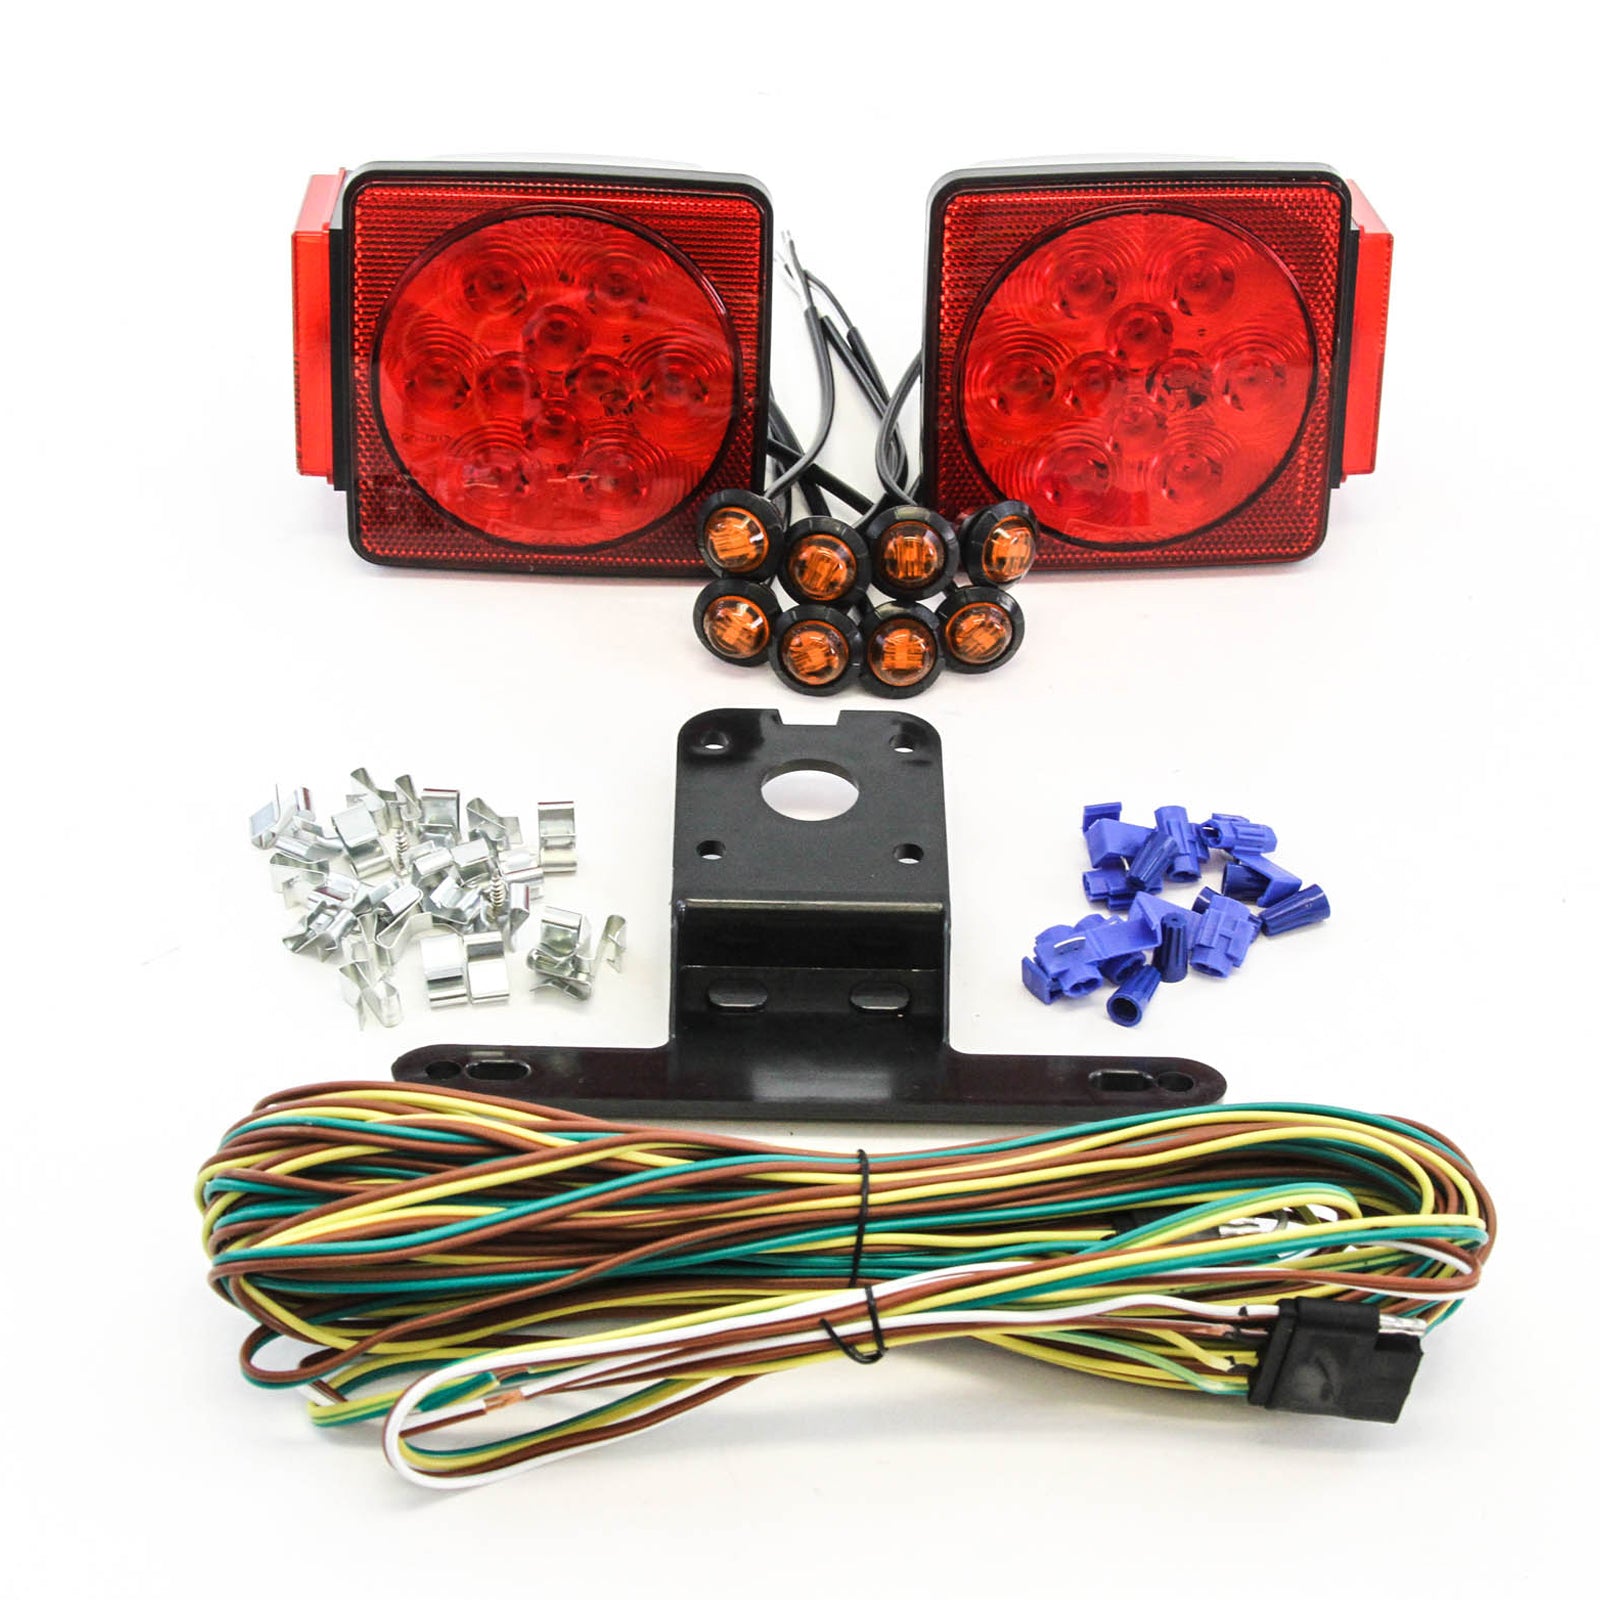 Red Hound Auto LED Submersible Square Light Kit Trailer 80 Inches- Boat Marine & 8 Amber Side Marker